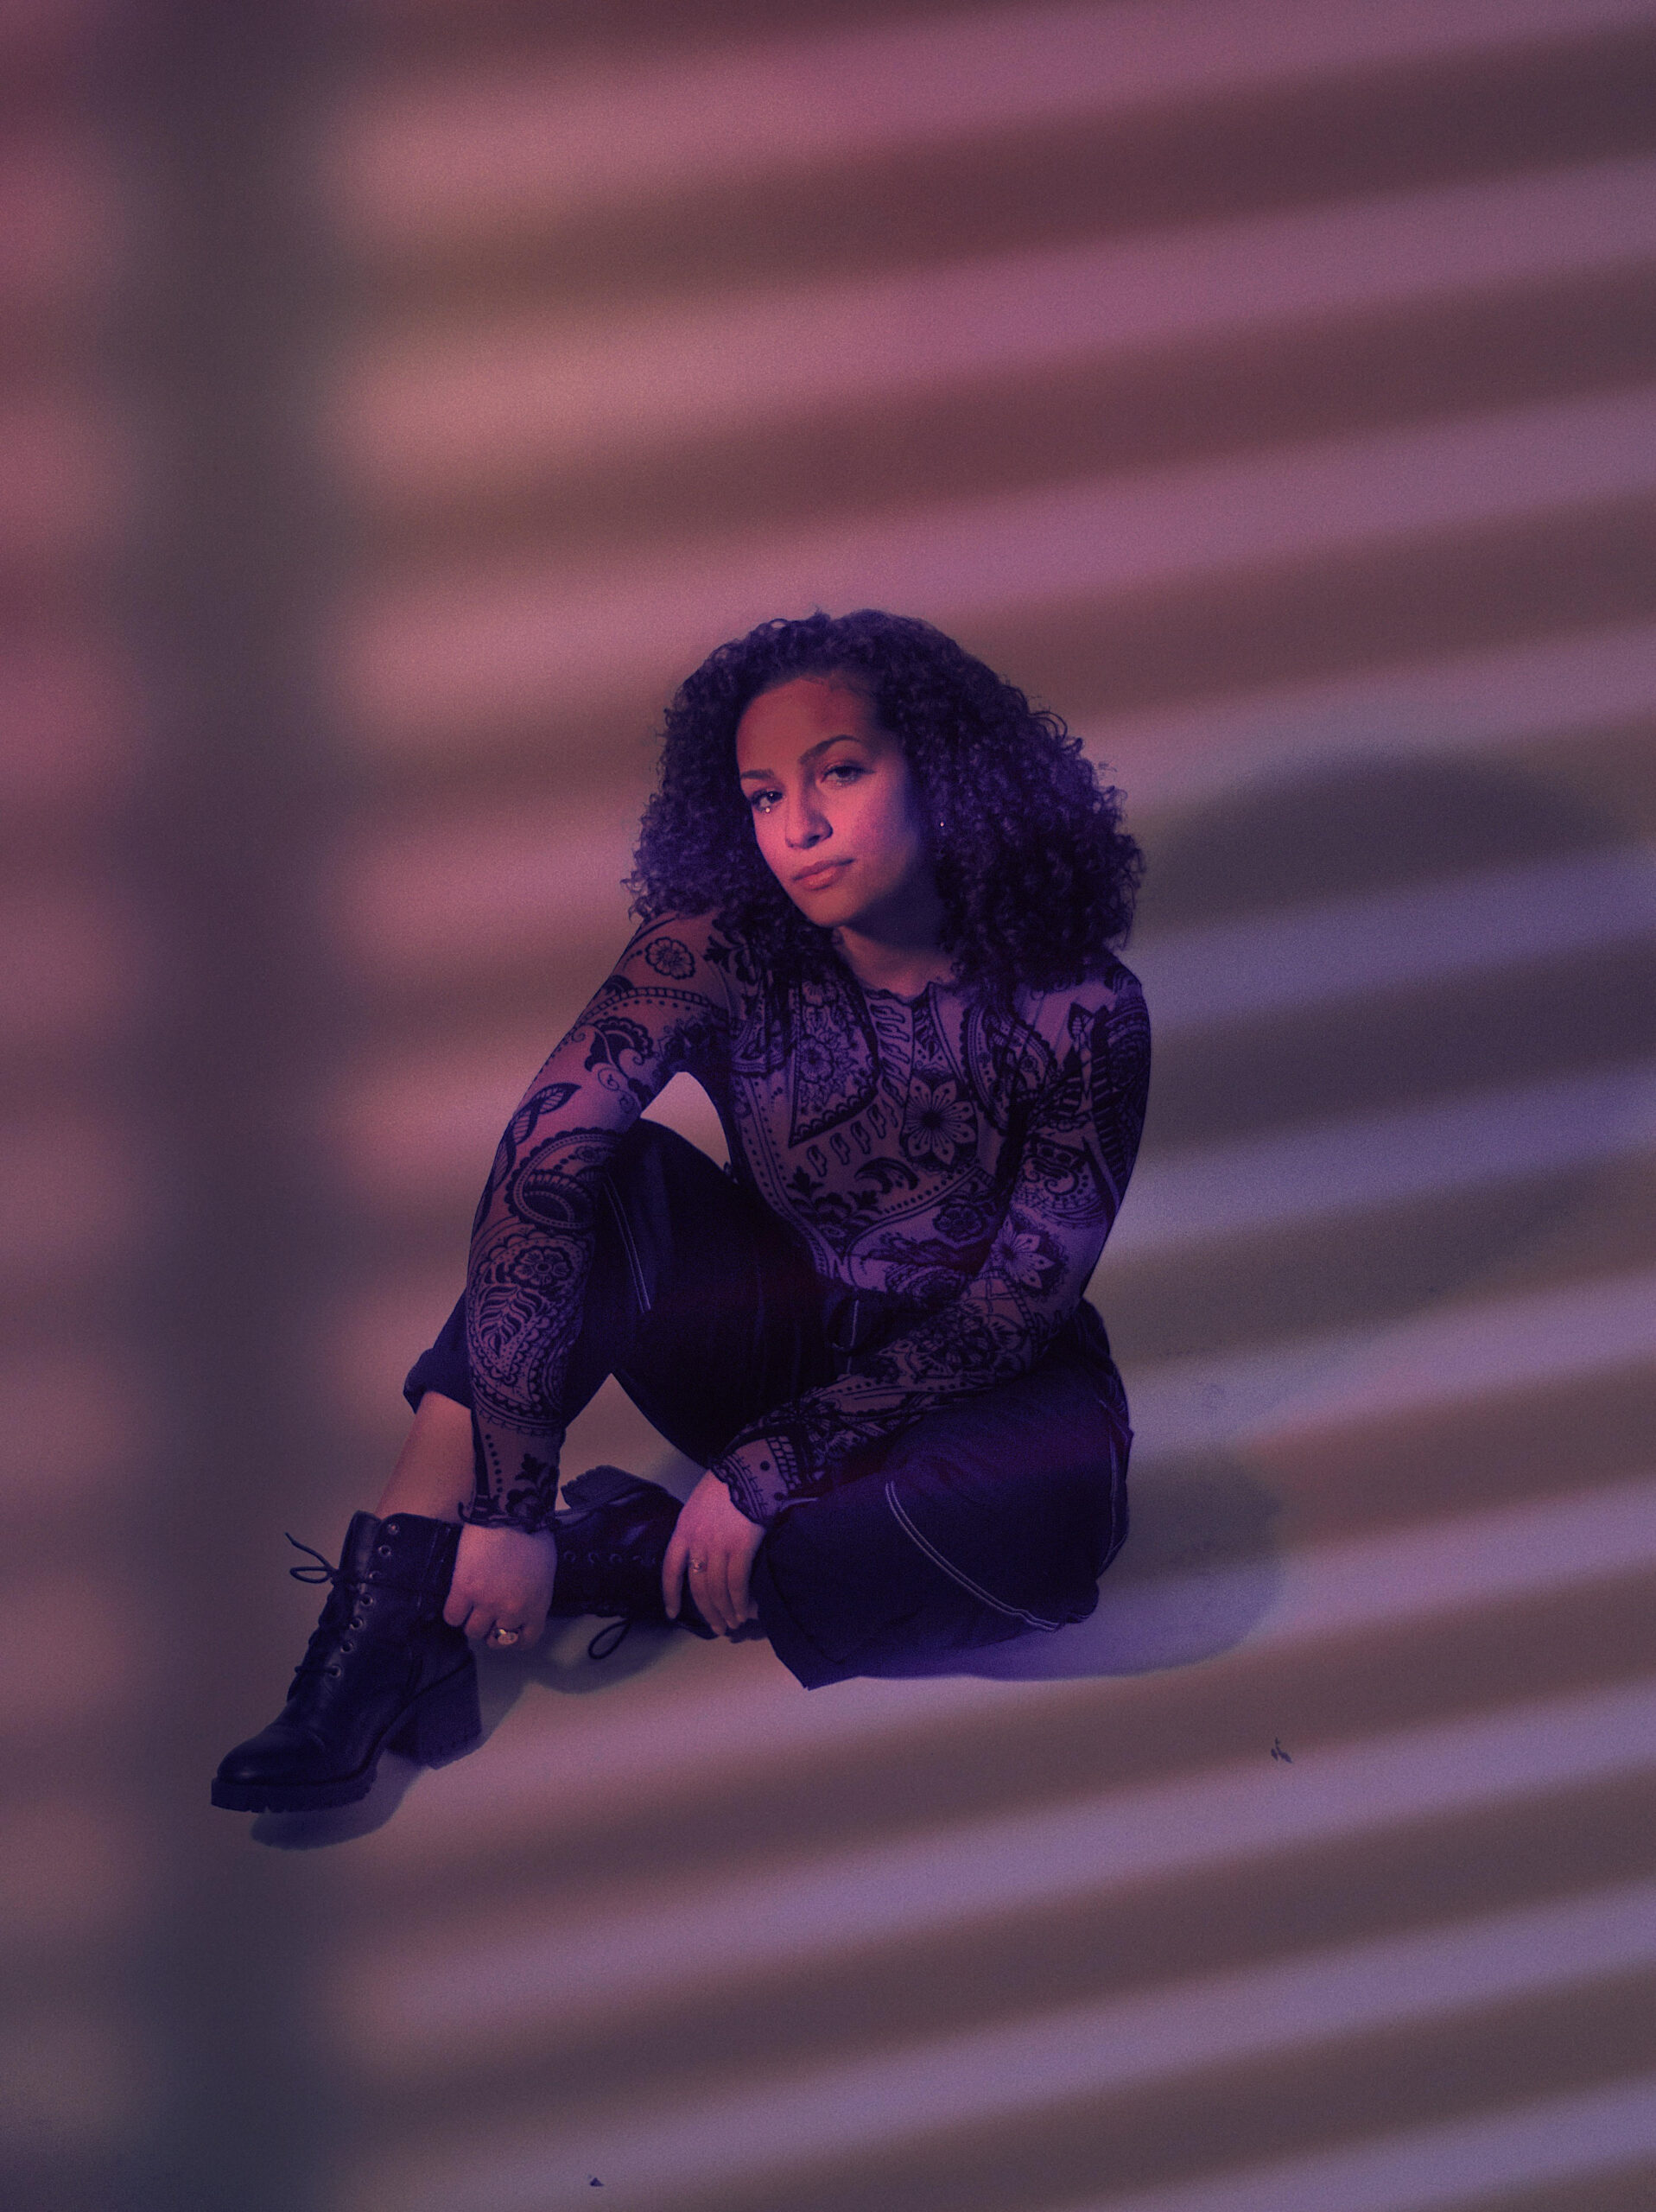 Shandelle Dazzles On Her First Ep "Introspection"